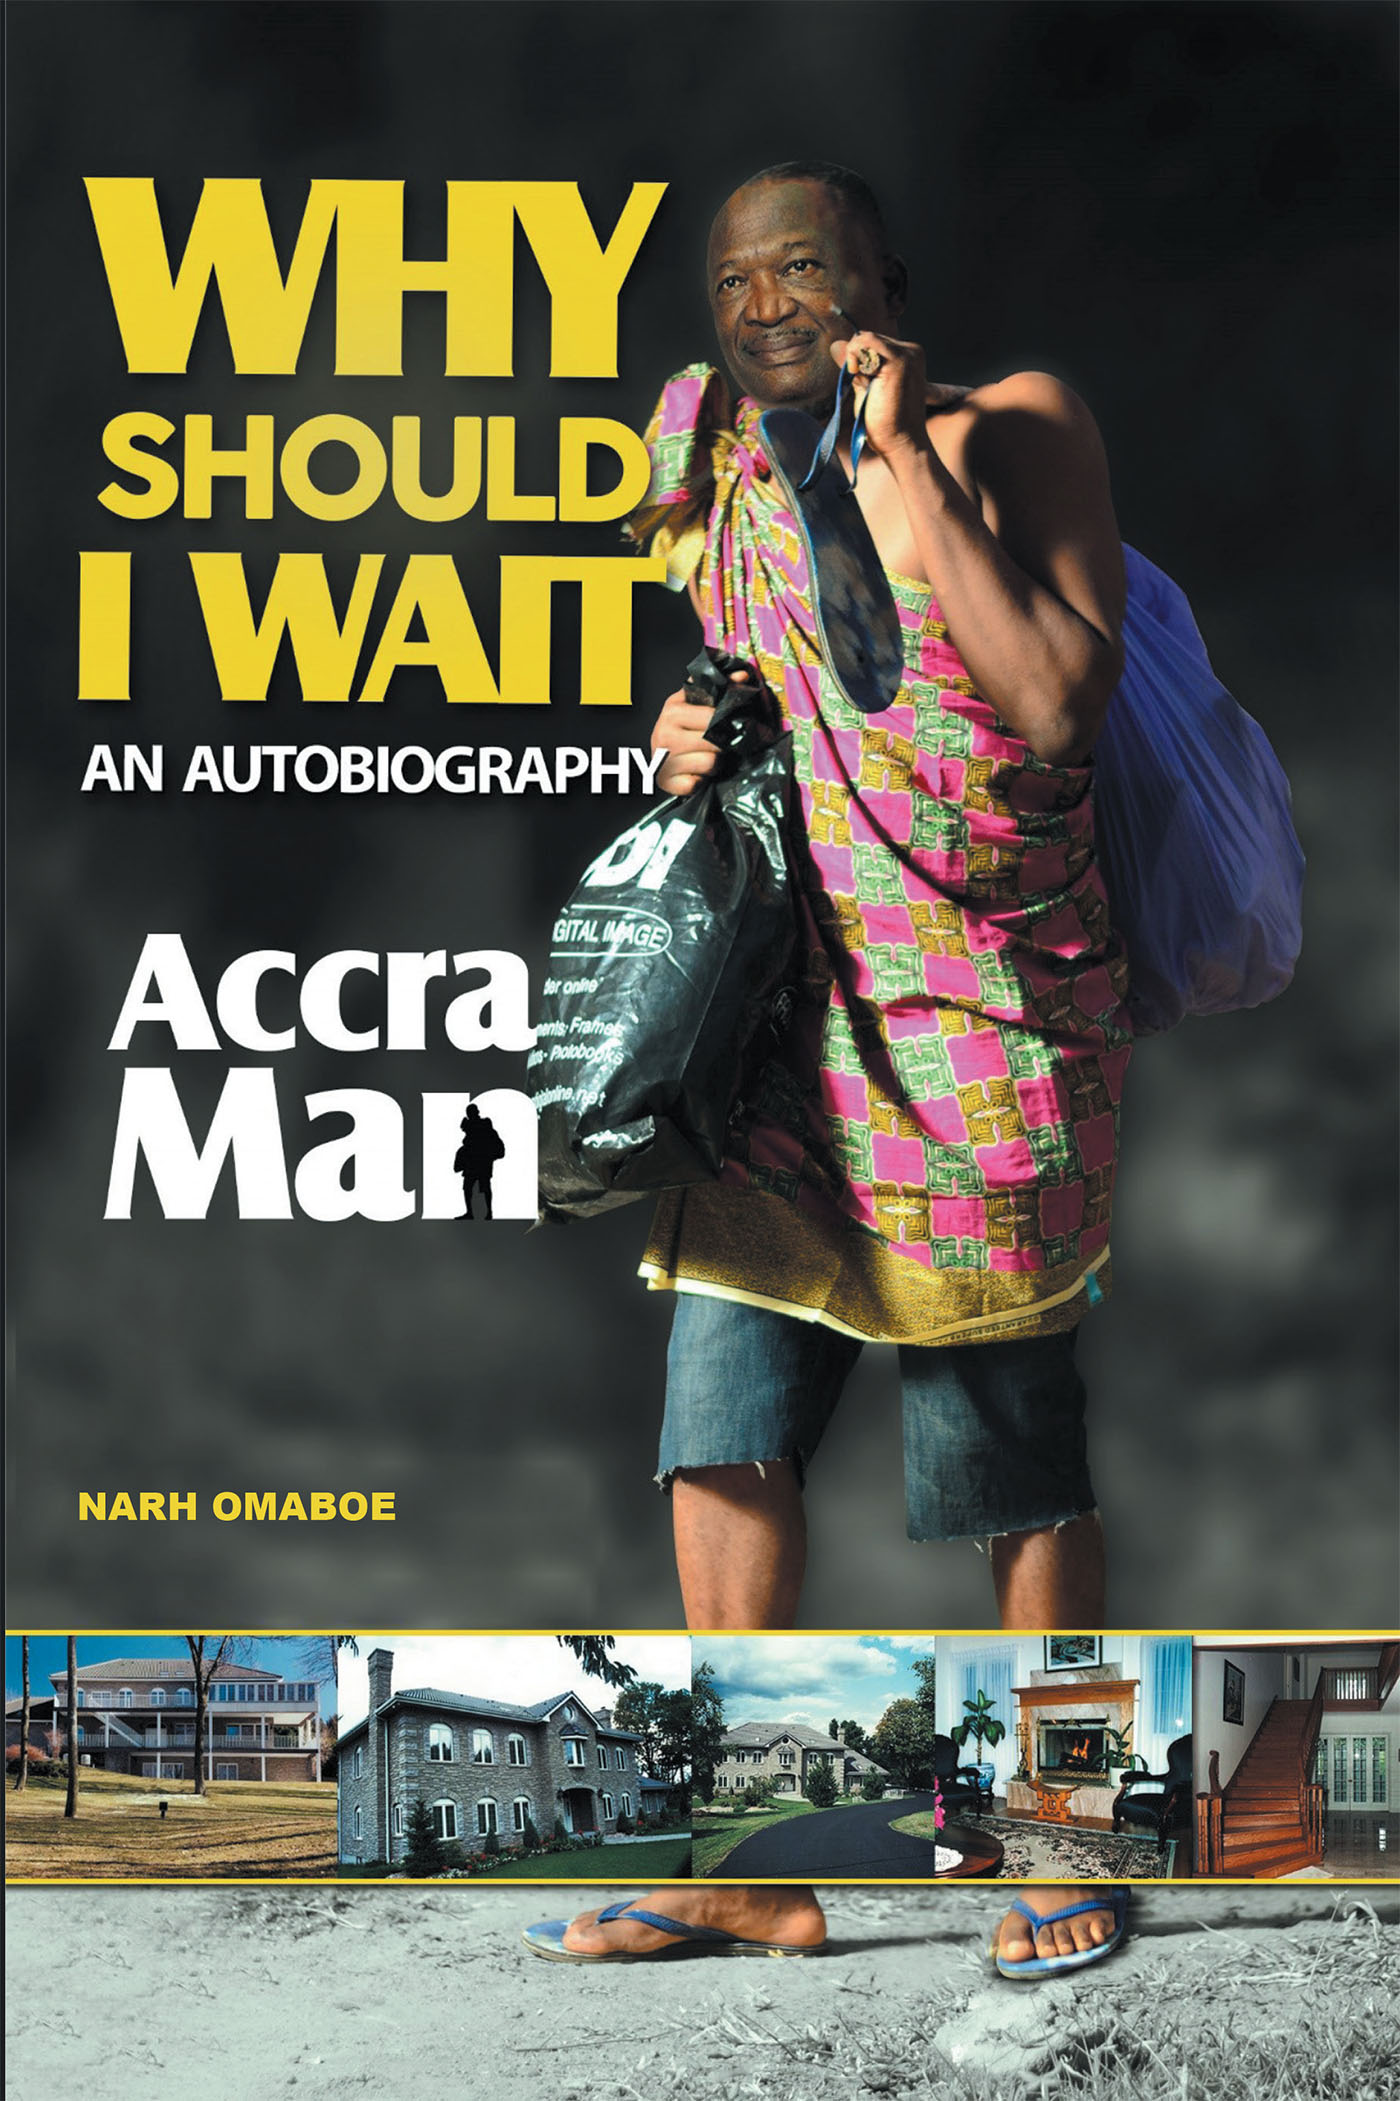 Why Should I Wait Cover Image